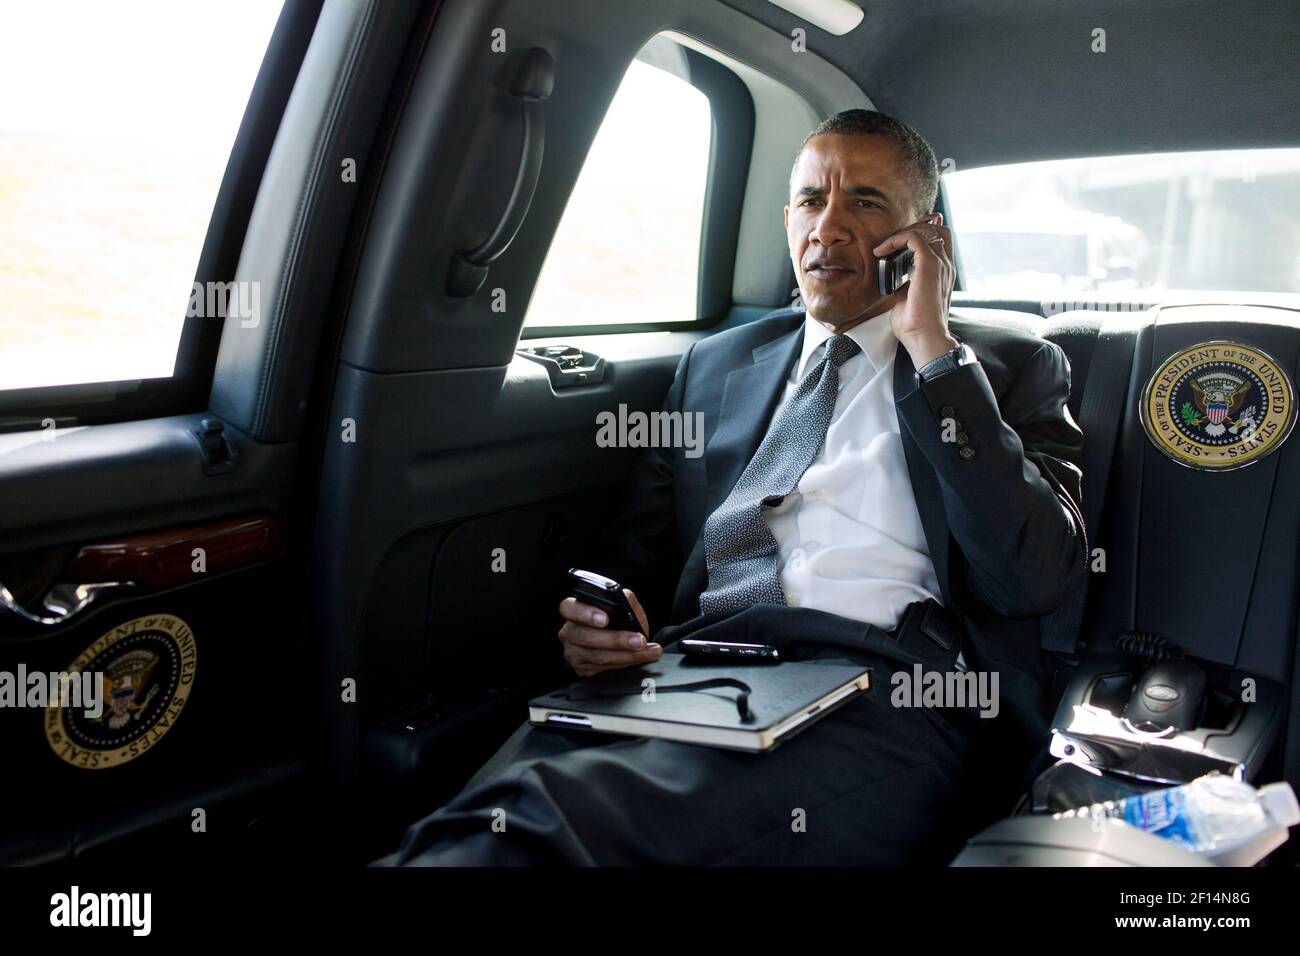 President Barack Obama talks on the phone with Aurora Mayor Steve Hogan during the motorcade ride to Palm Beach International Airport in Palm Beach Fla. July 20 2012. The President called Mayor Hogan to offer his condolences and support to the Aurora community. Stock Photo